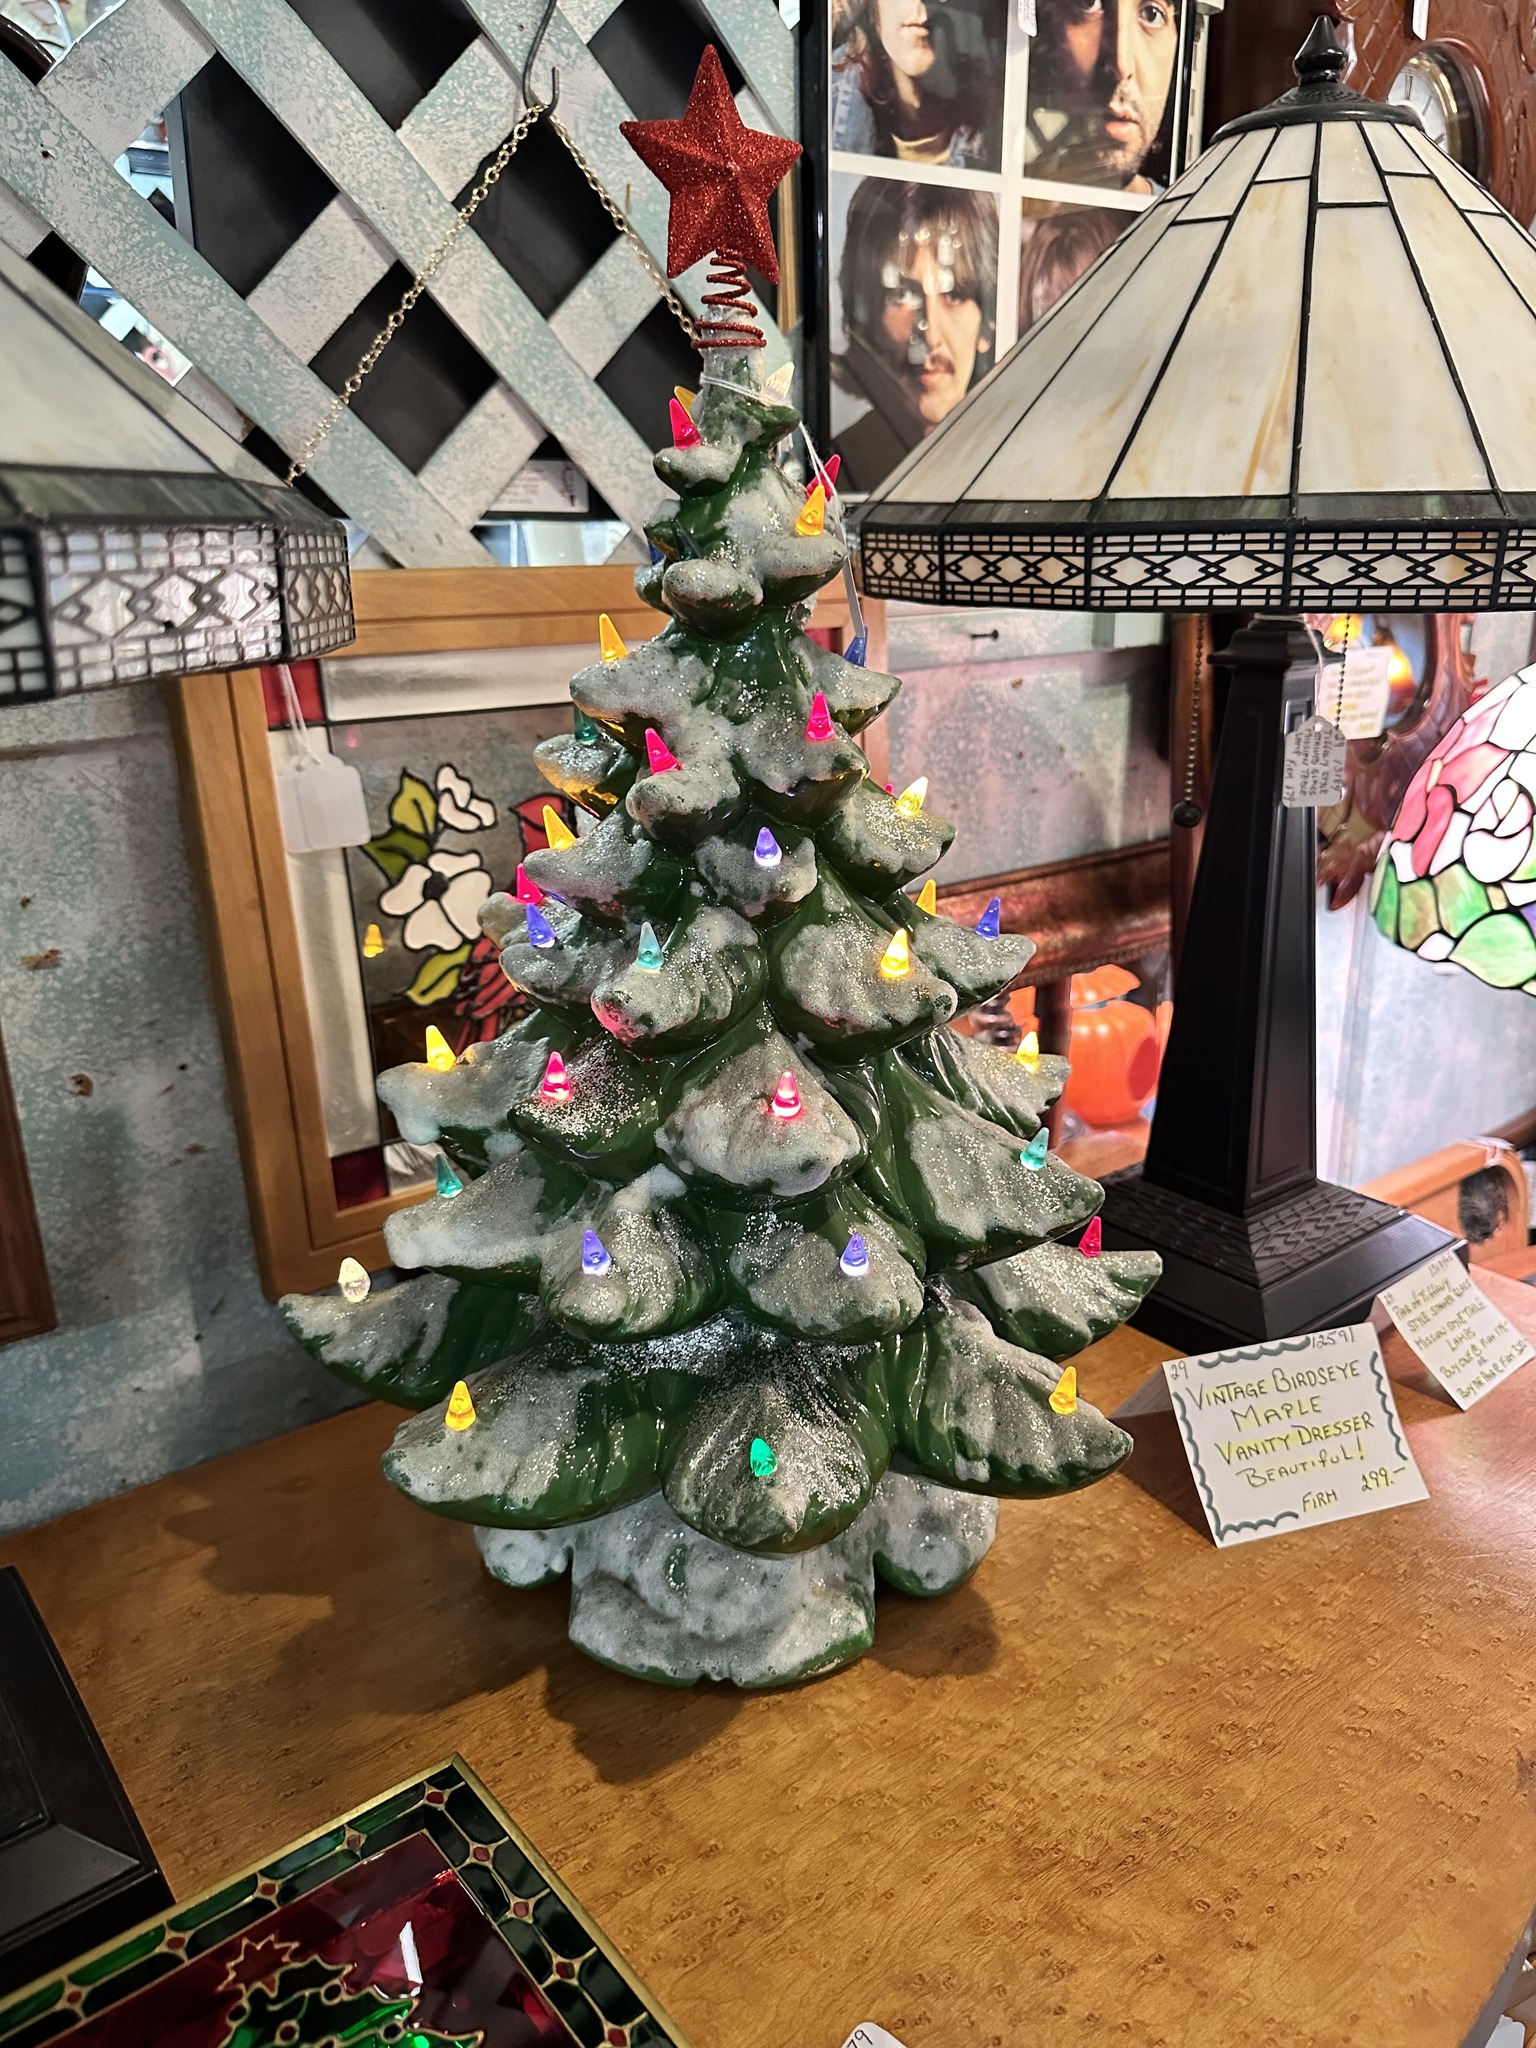 Booth 121 - Ceramic Christmas Tree. - Scranberry Coop - Vintage Store - Antiques, Collectibles, & More